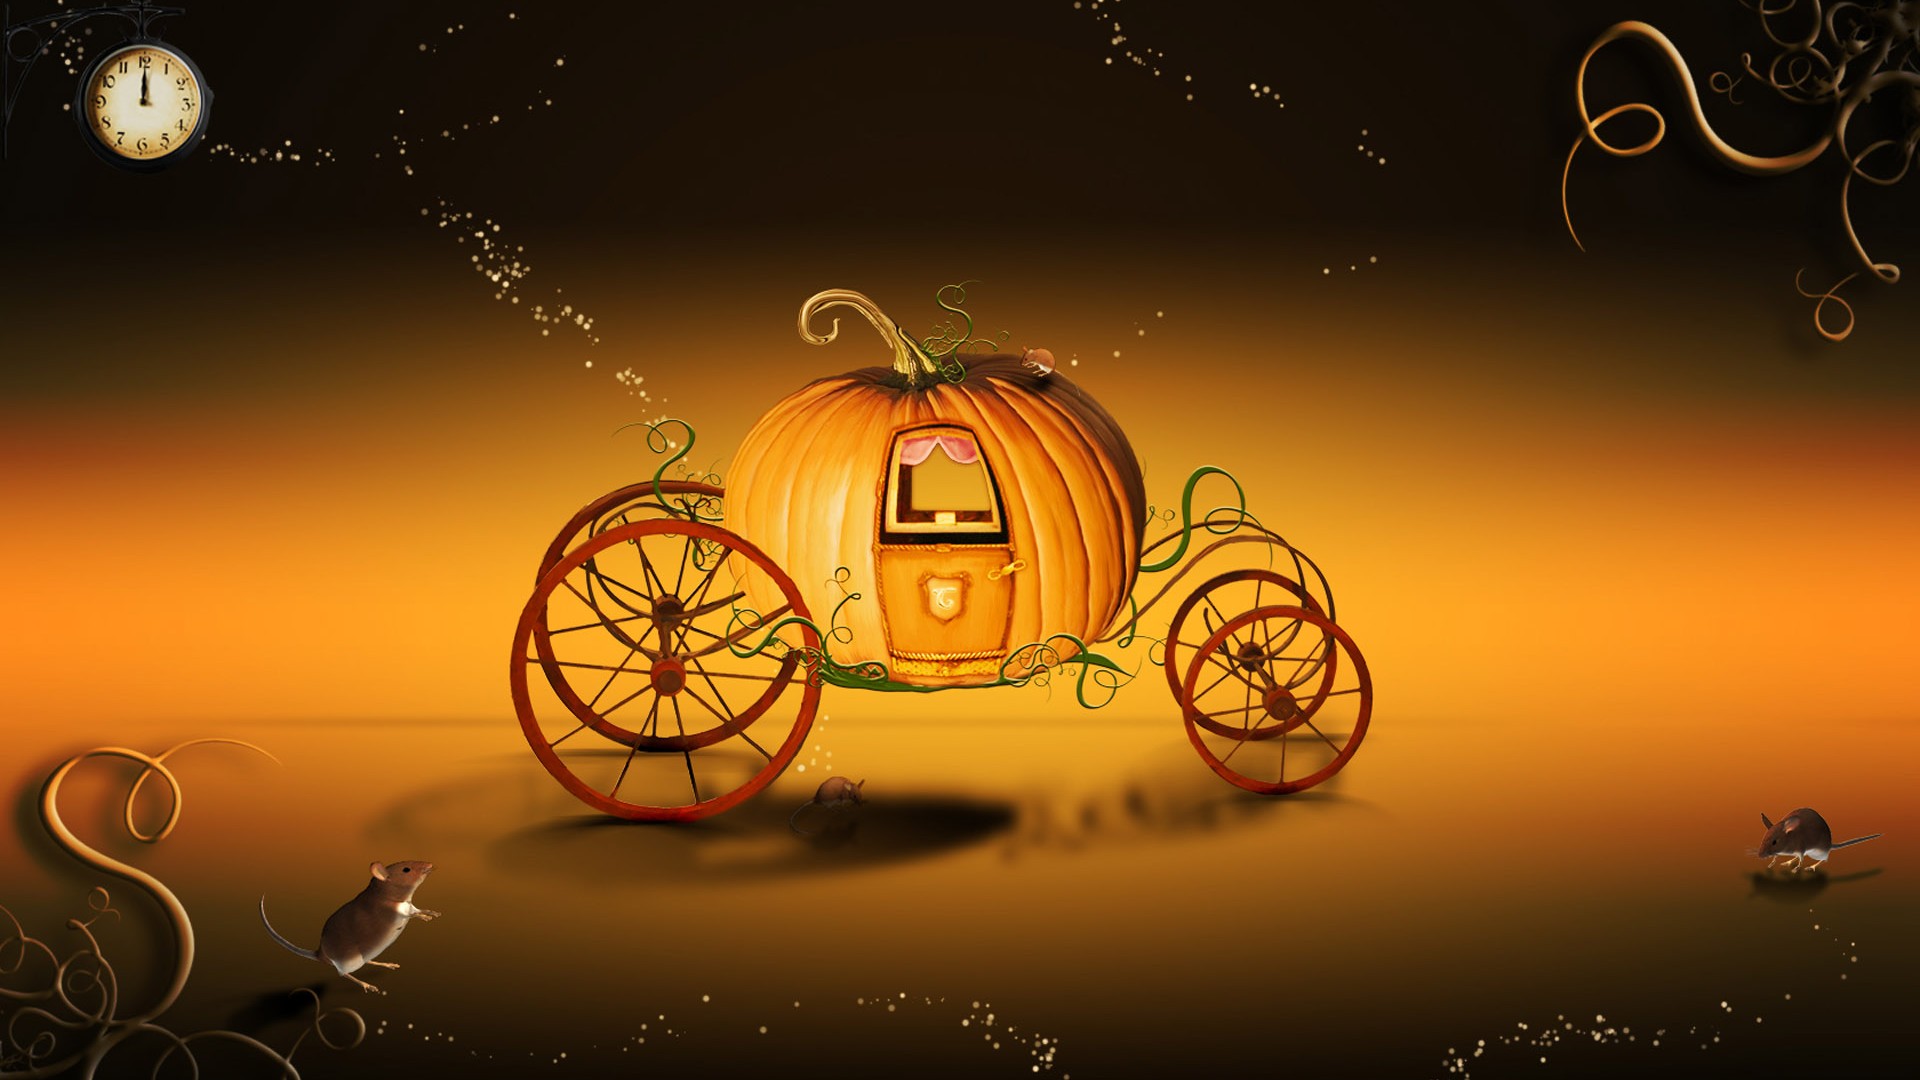 Scary HD Wallpapers for Halloween 2.